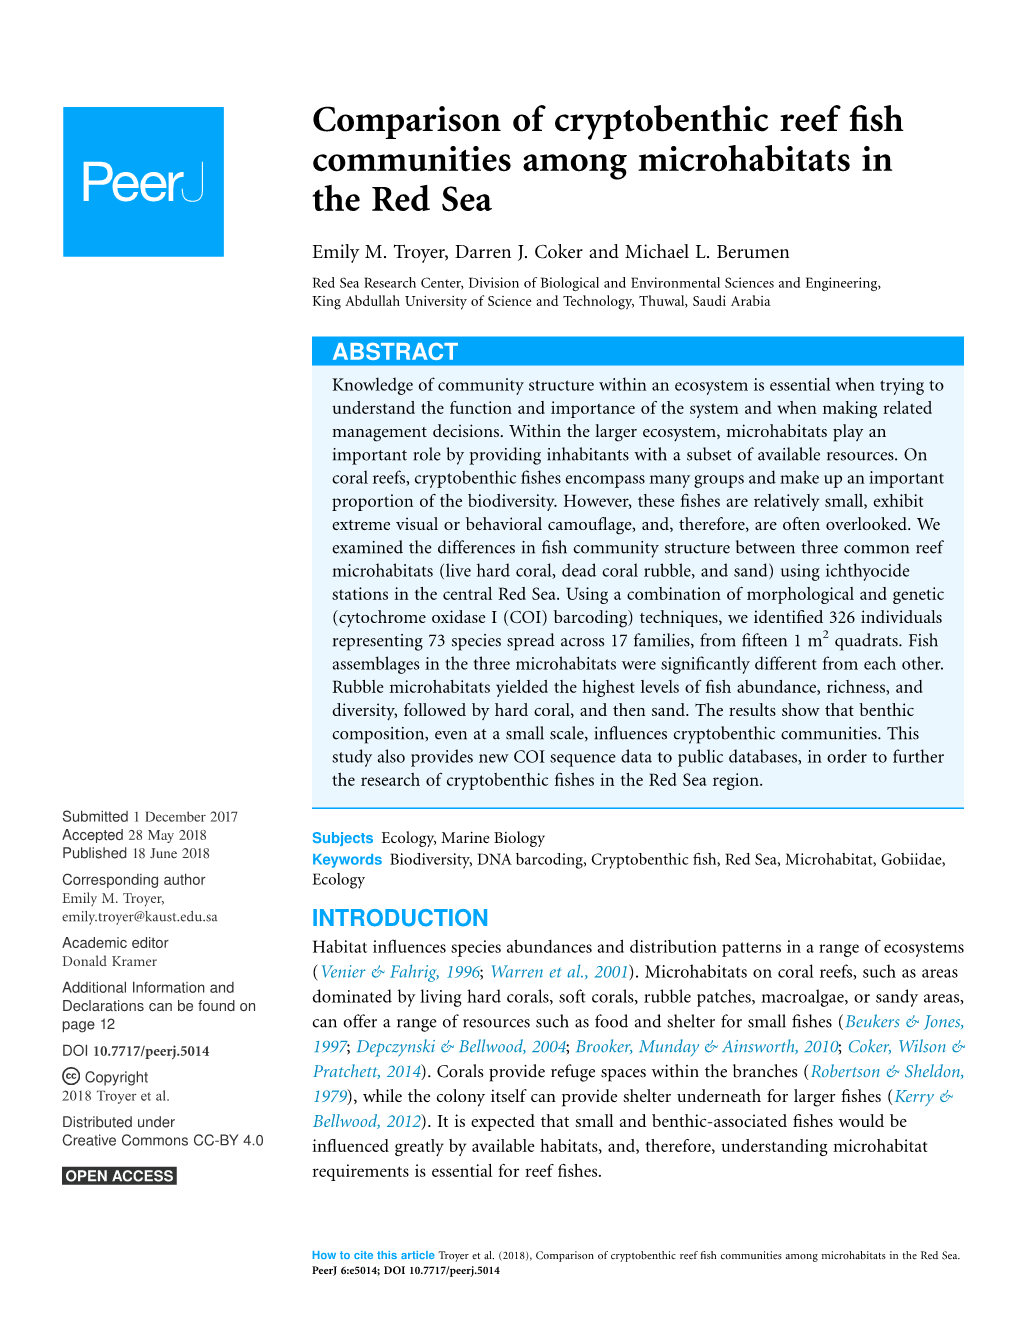 Comparison of Cryptobenthic Reef Fish Communities Among Microhabitats in the Red